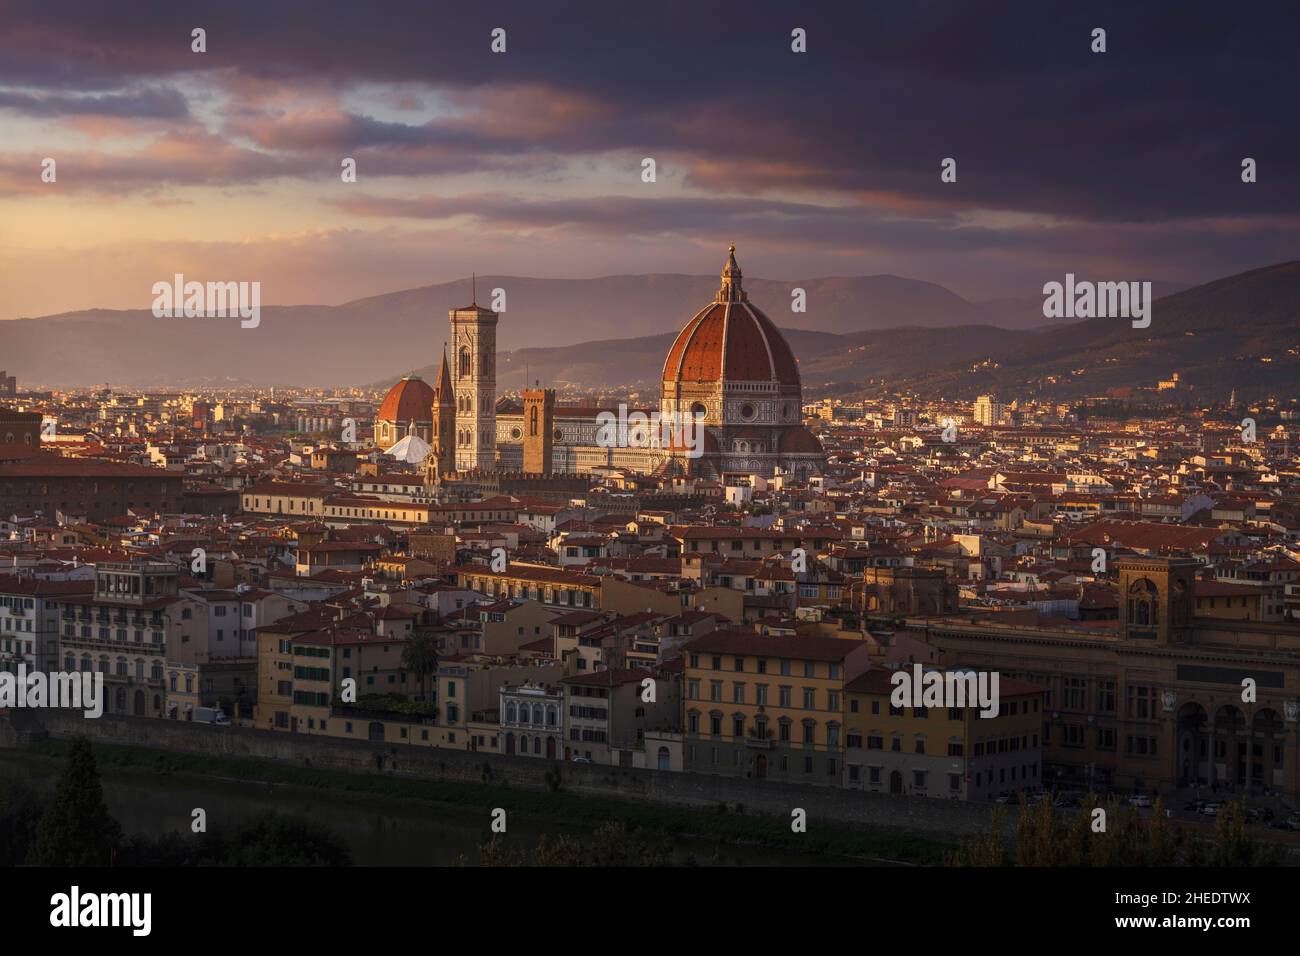 Florence or Firenze, Duomo Cathedral, Basilica Santa Maria del Fiore landmark and Giotto Campanile. Sunset view from Piazzale Michelangelo square. Tus Stock Photo